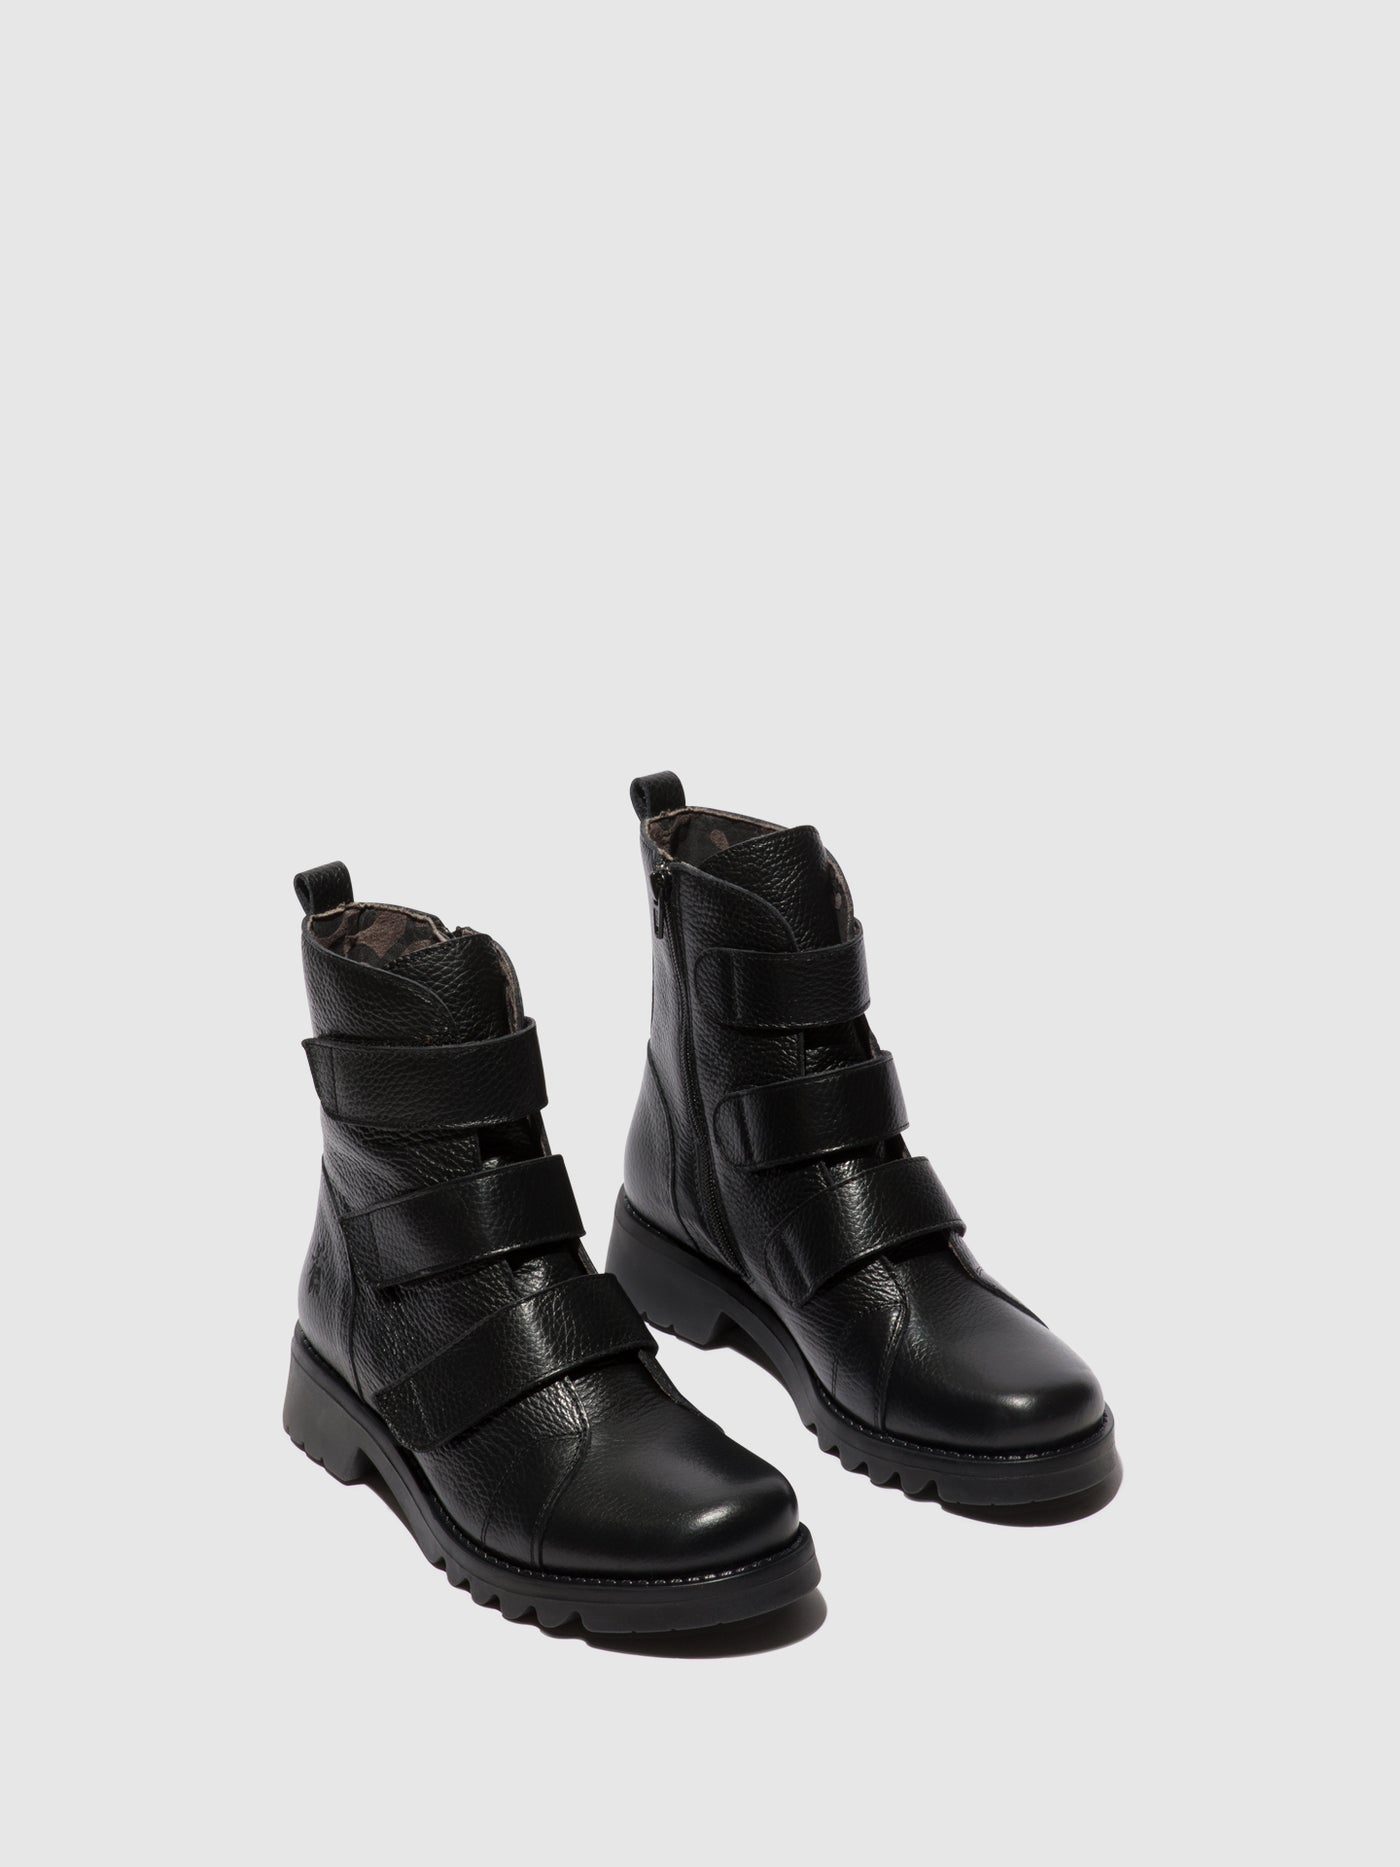 Velcro Ankle Boots RACH790FLY BLACK